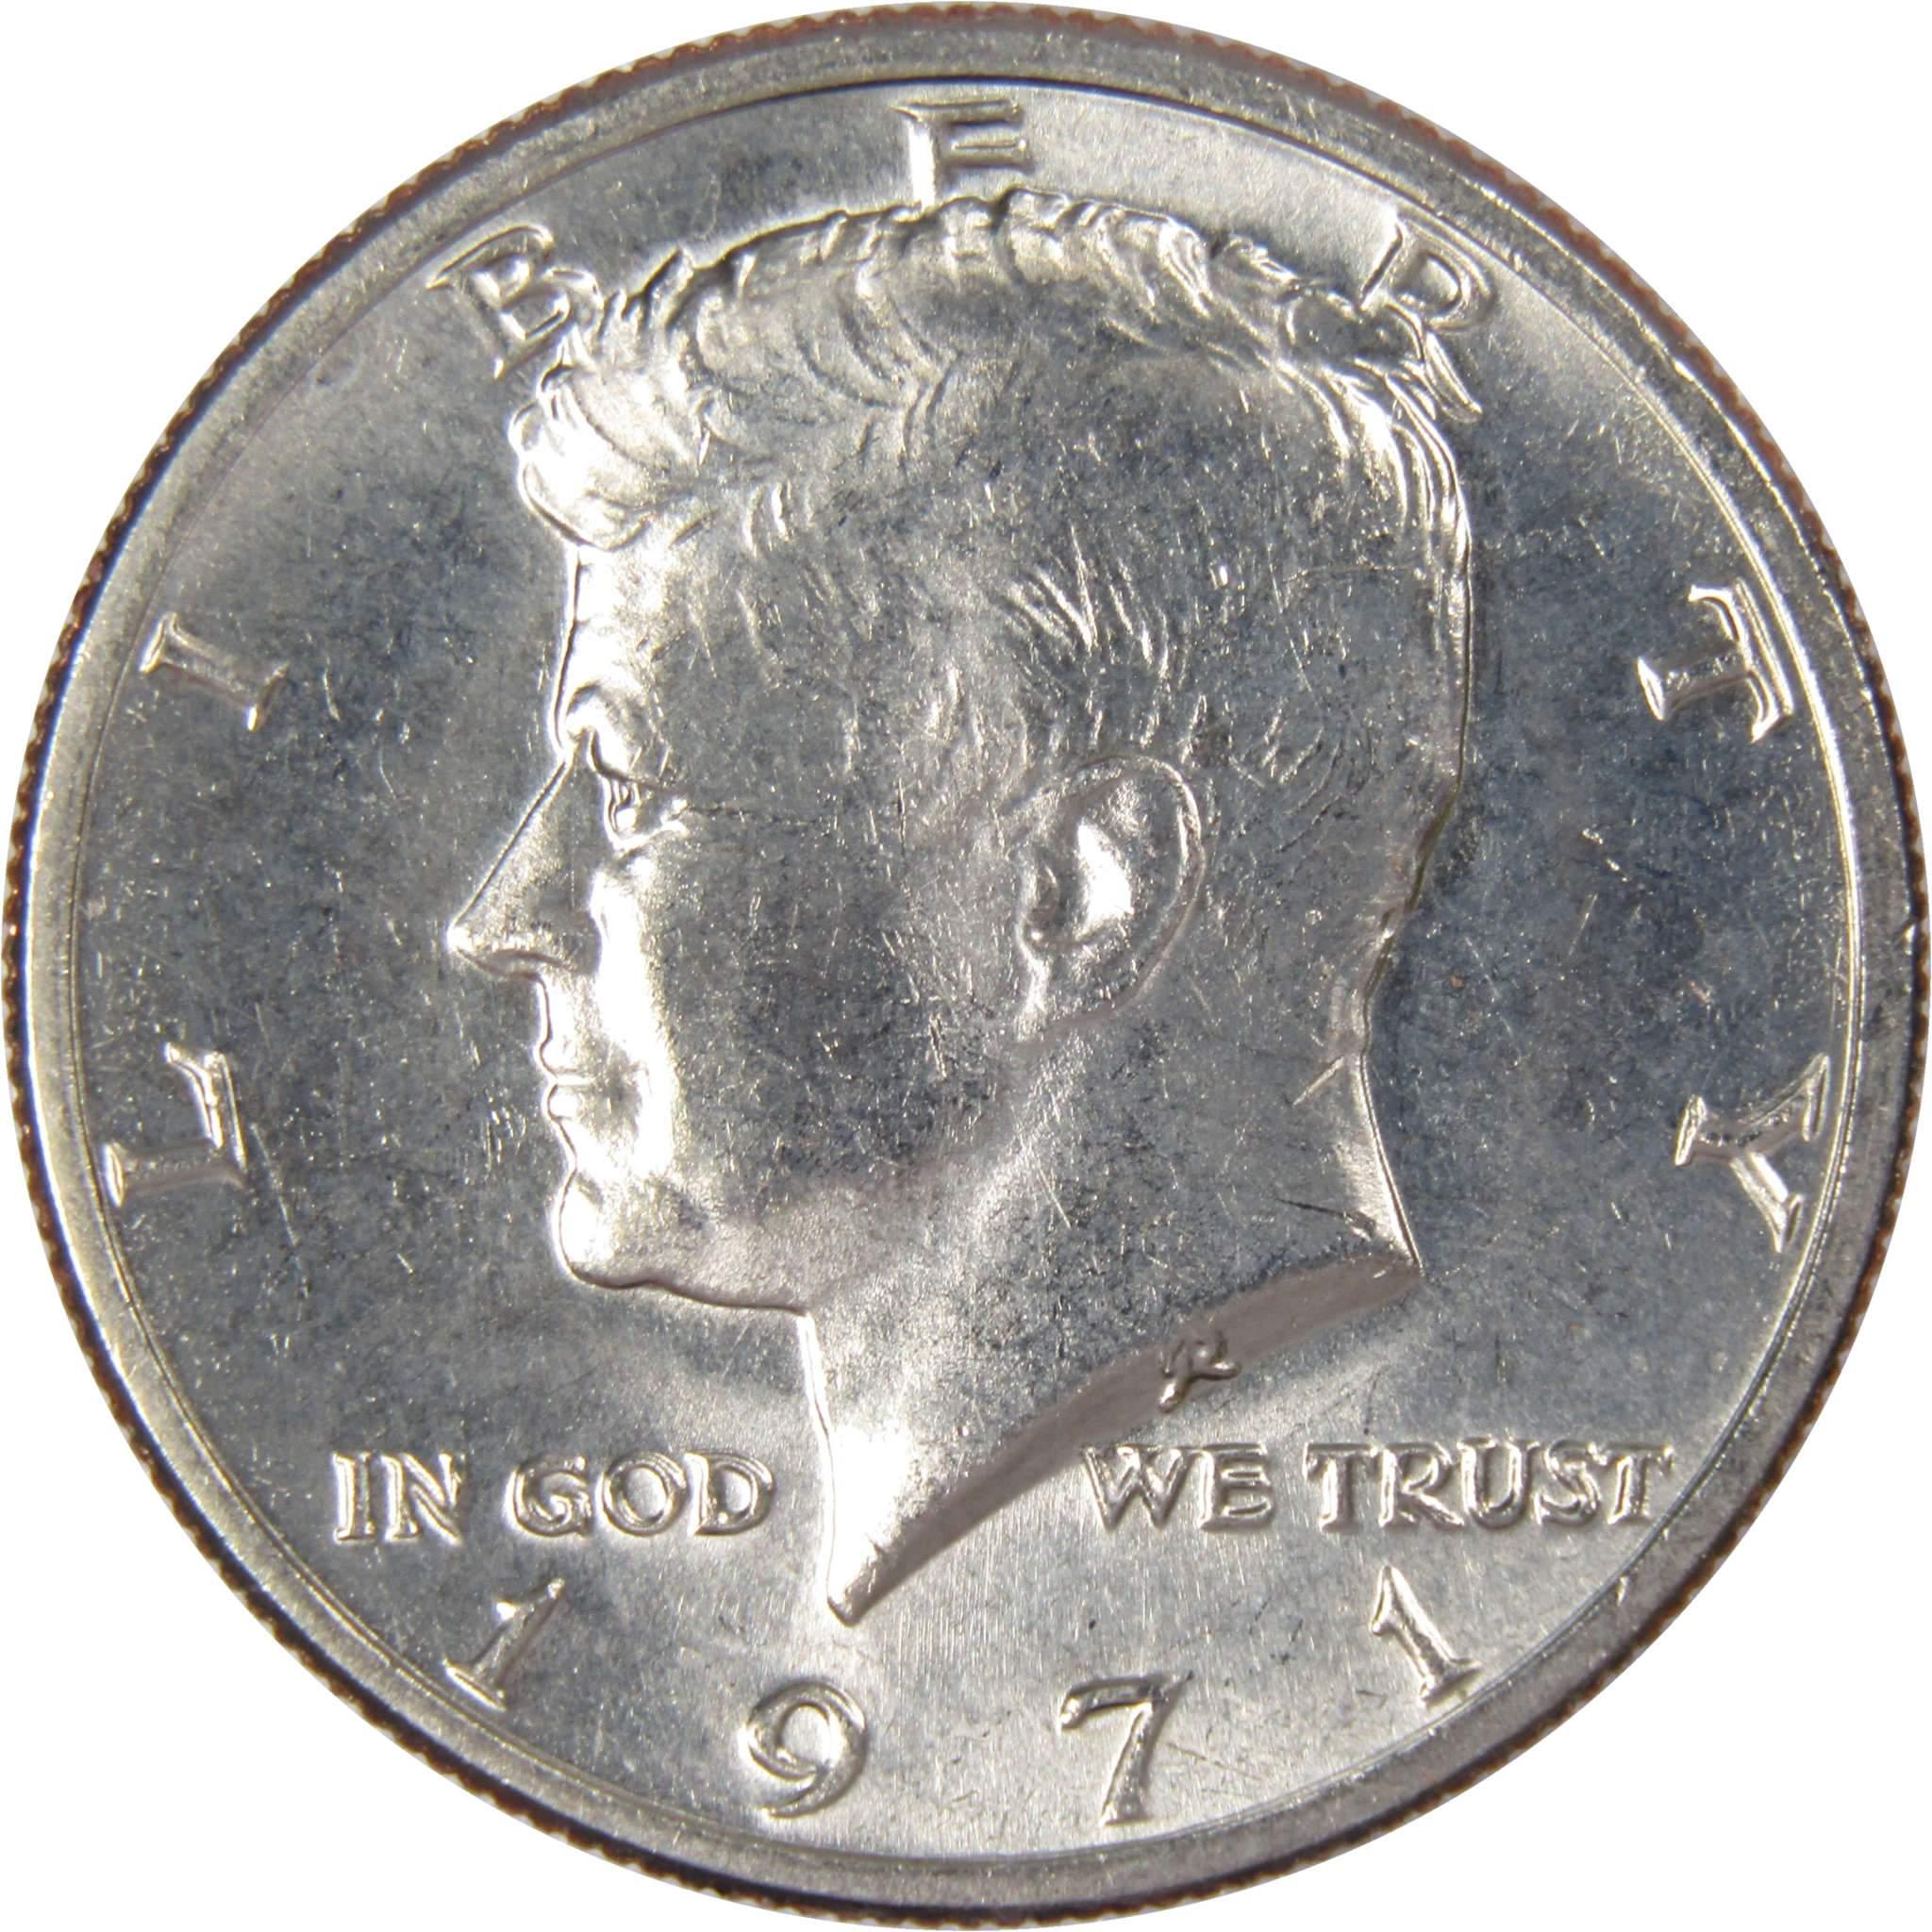 1971 Kennedy Half Dollar BU Uncirculated Mint State 50c US Coin Collectible